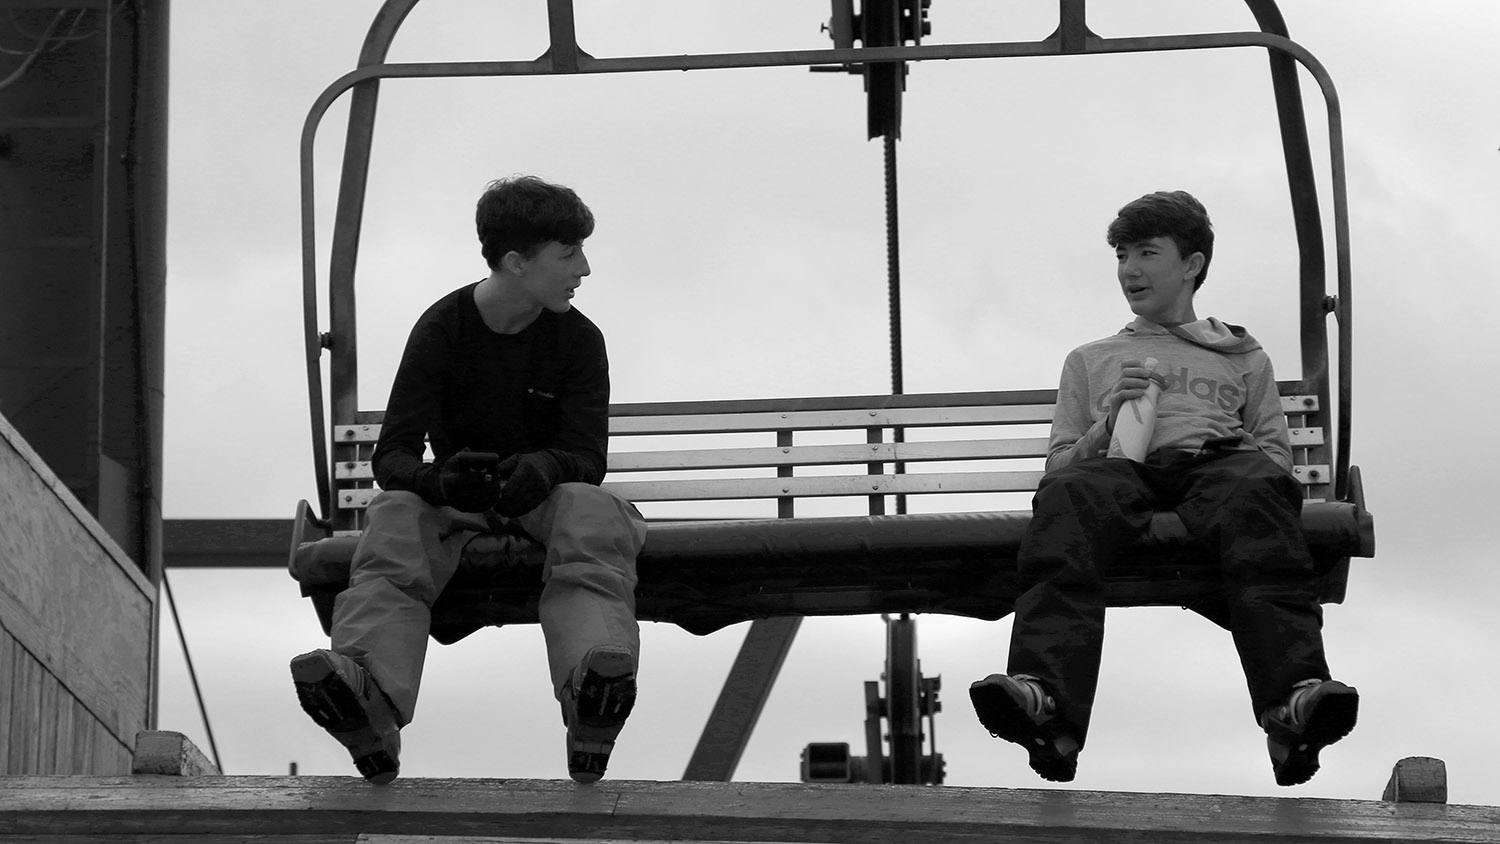 An image of Ty and Dylan on a chair of the Timberline Quad Chairlift during a ski tour at Bolton Valley Resort in Vermont.